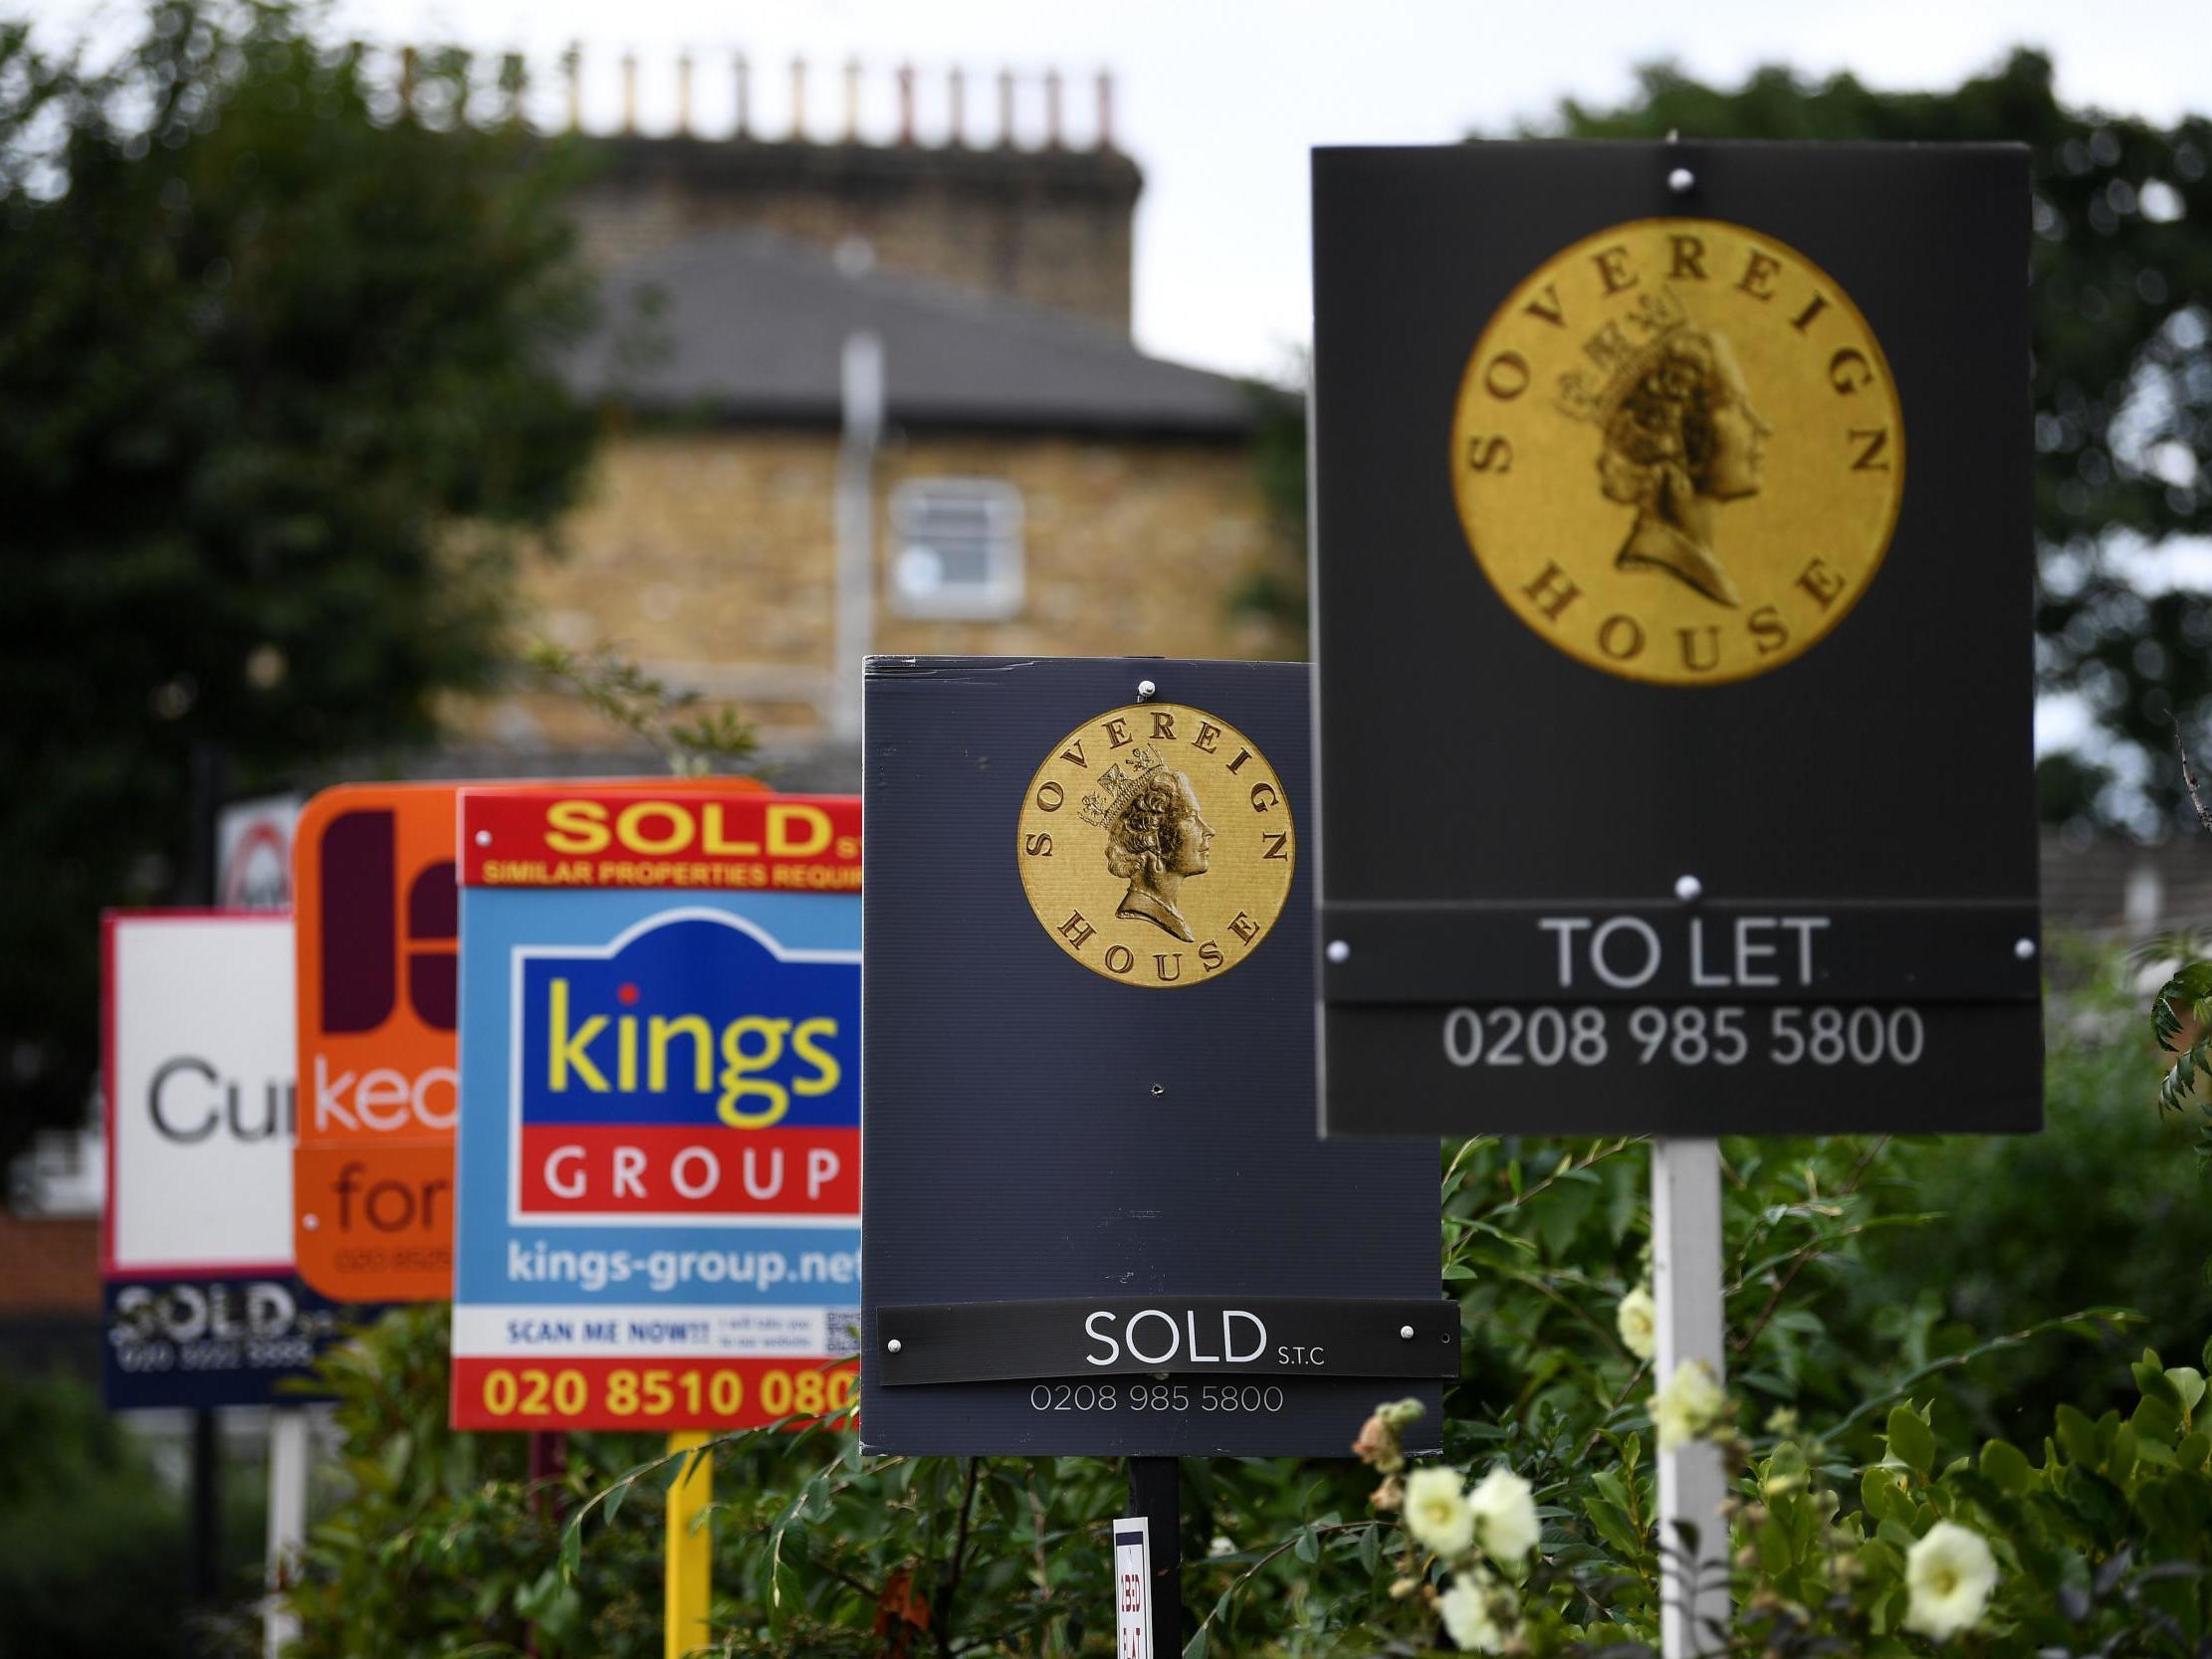 The housing market has gradually been reopened after restrictions were imposed earlier this year